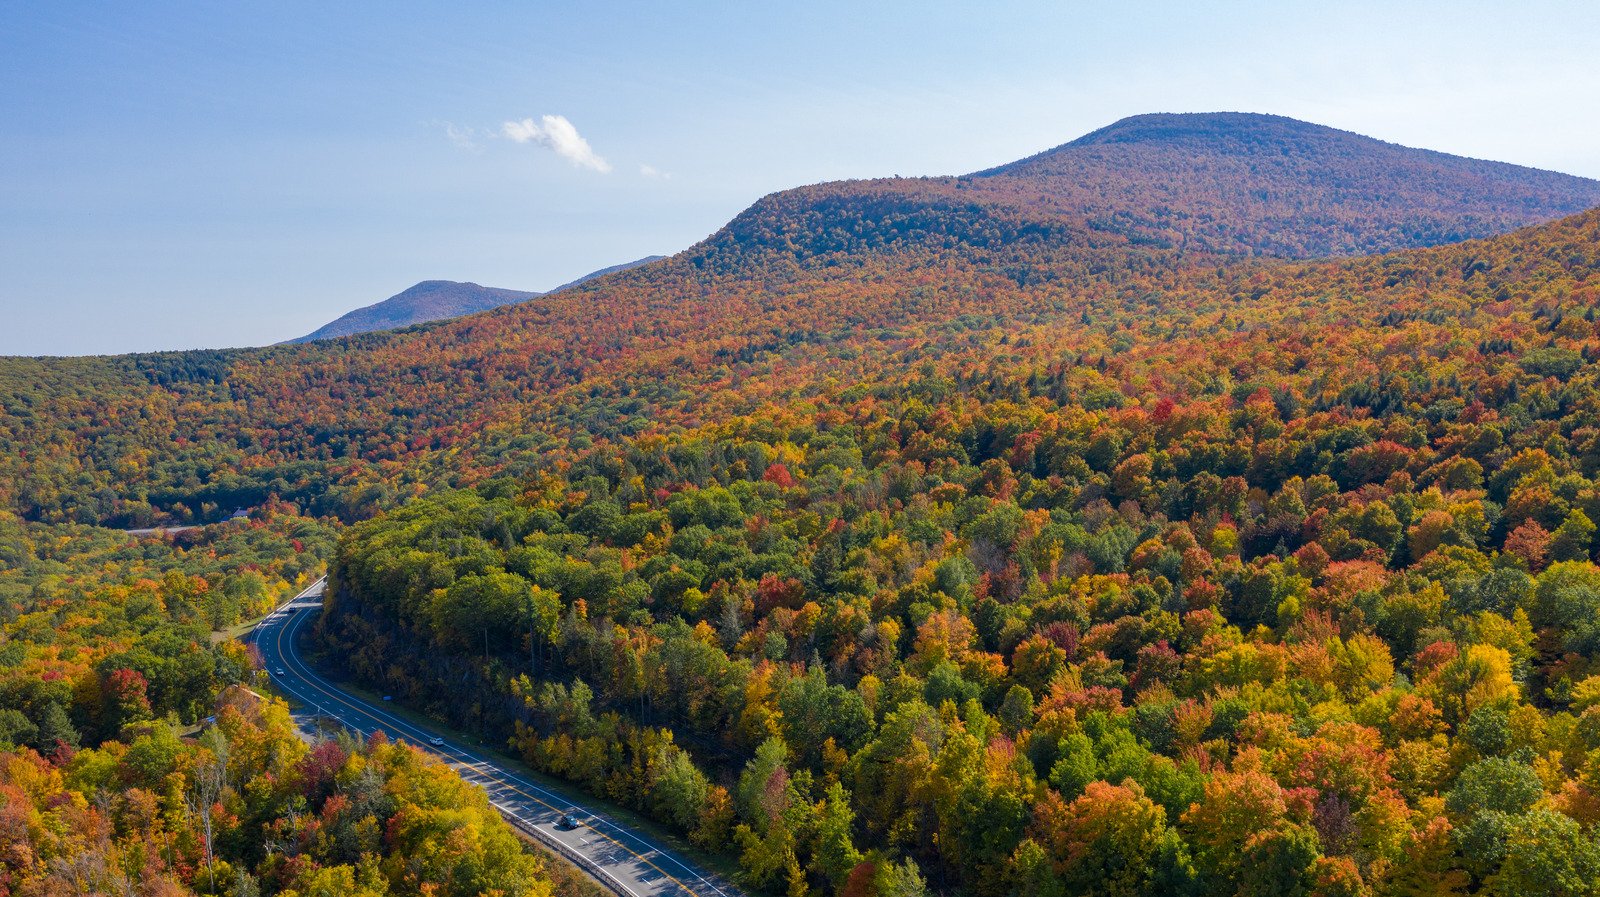 What You'll Need To Know To Navigate The Most Dangerous Hike In The Catskills